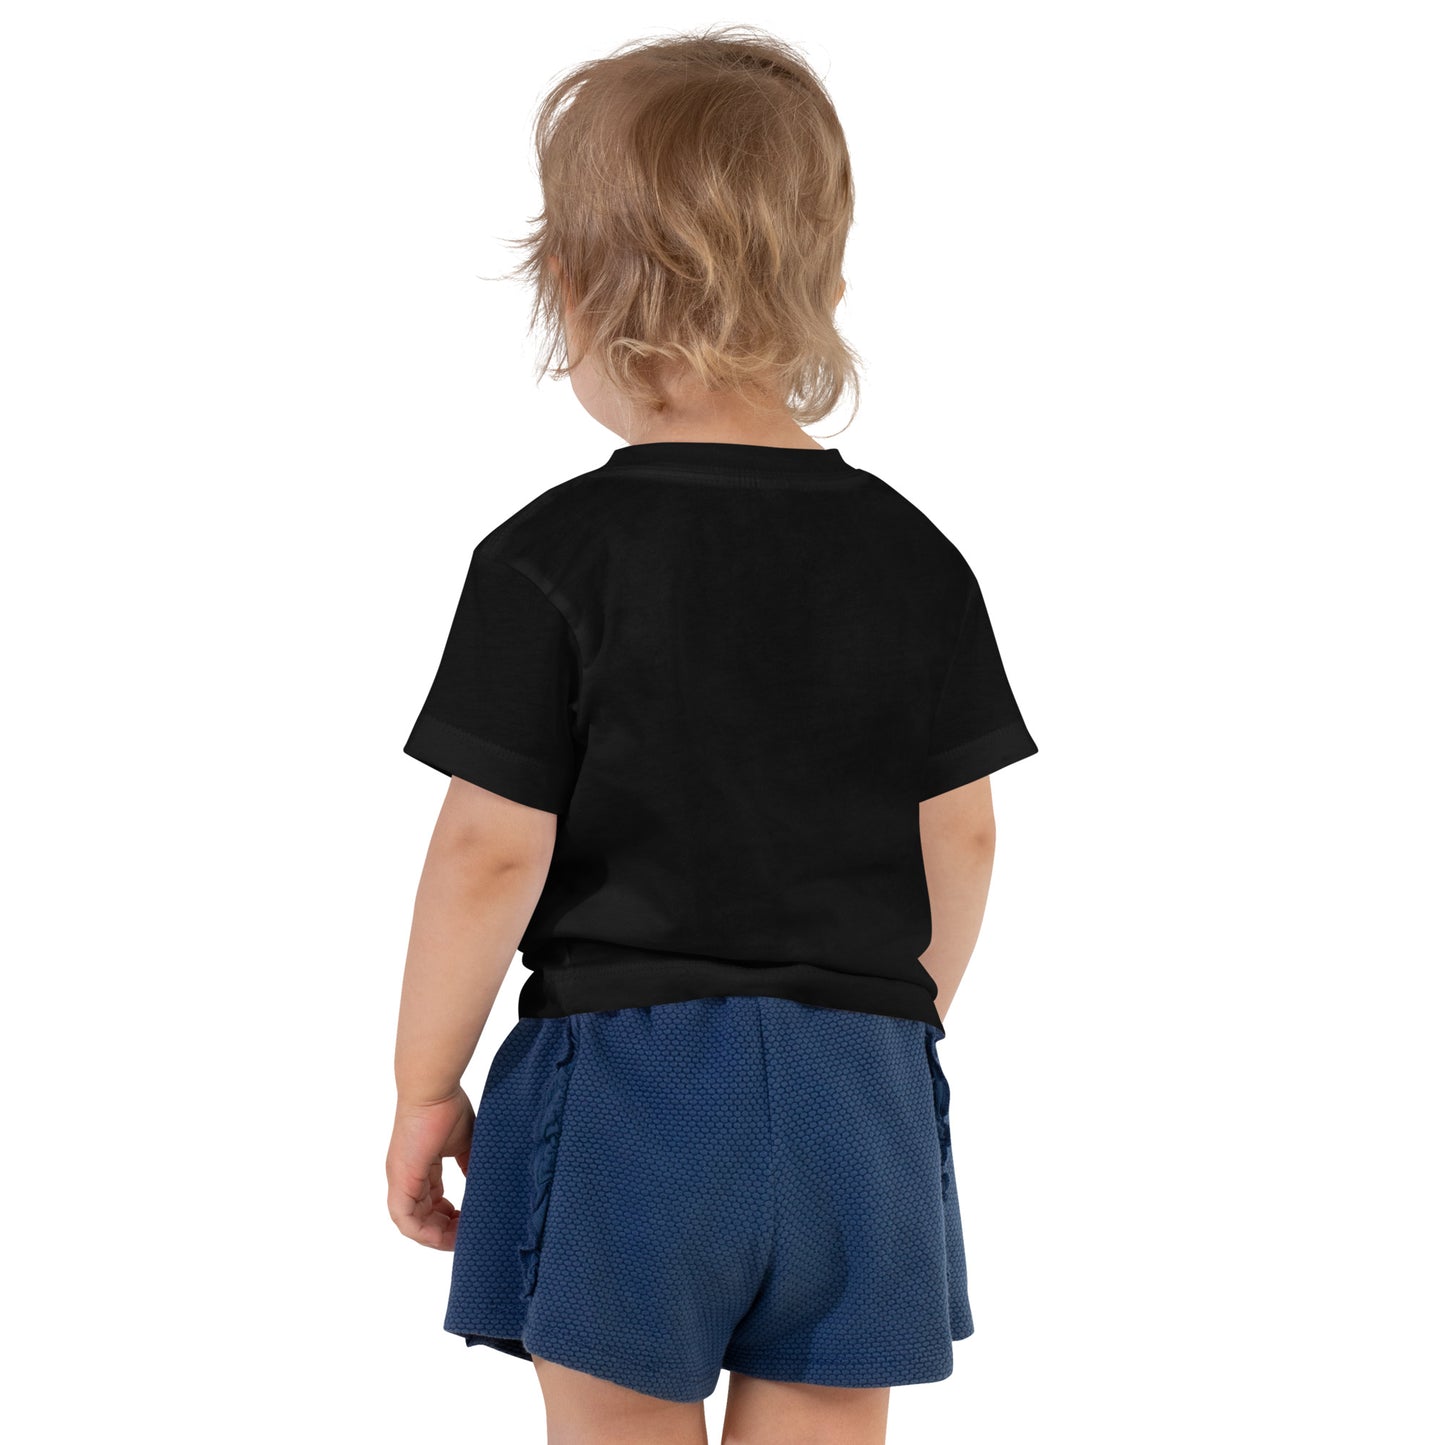 Lady A Cappella - Regular Fit - Toddler Short Sleeve Tee